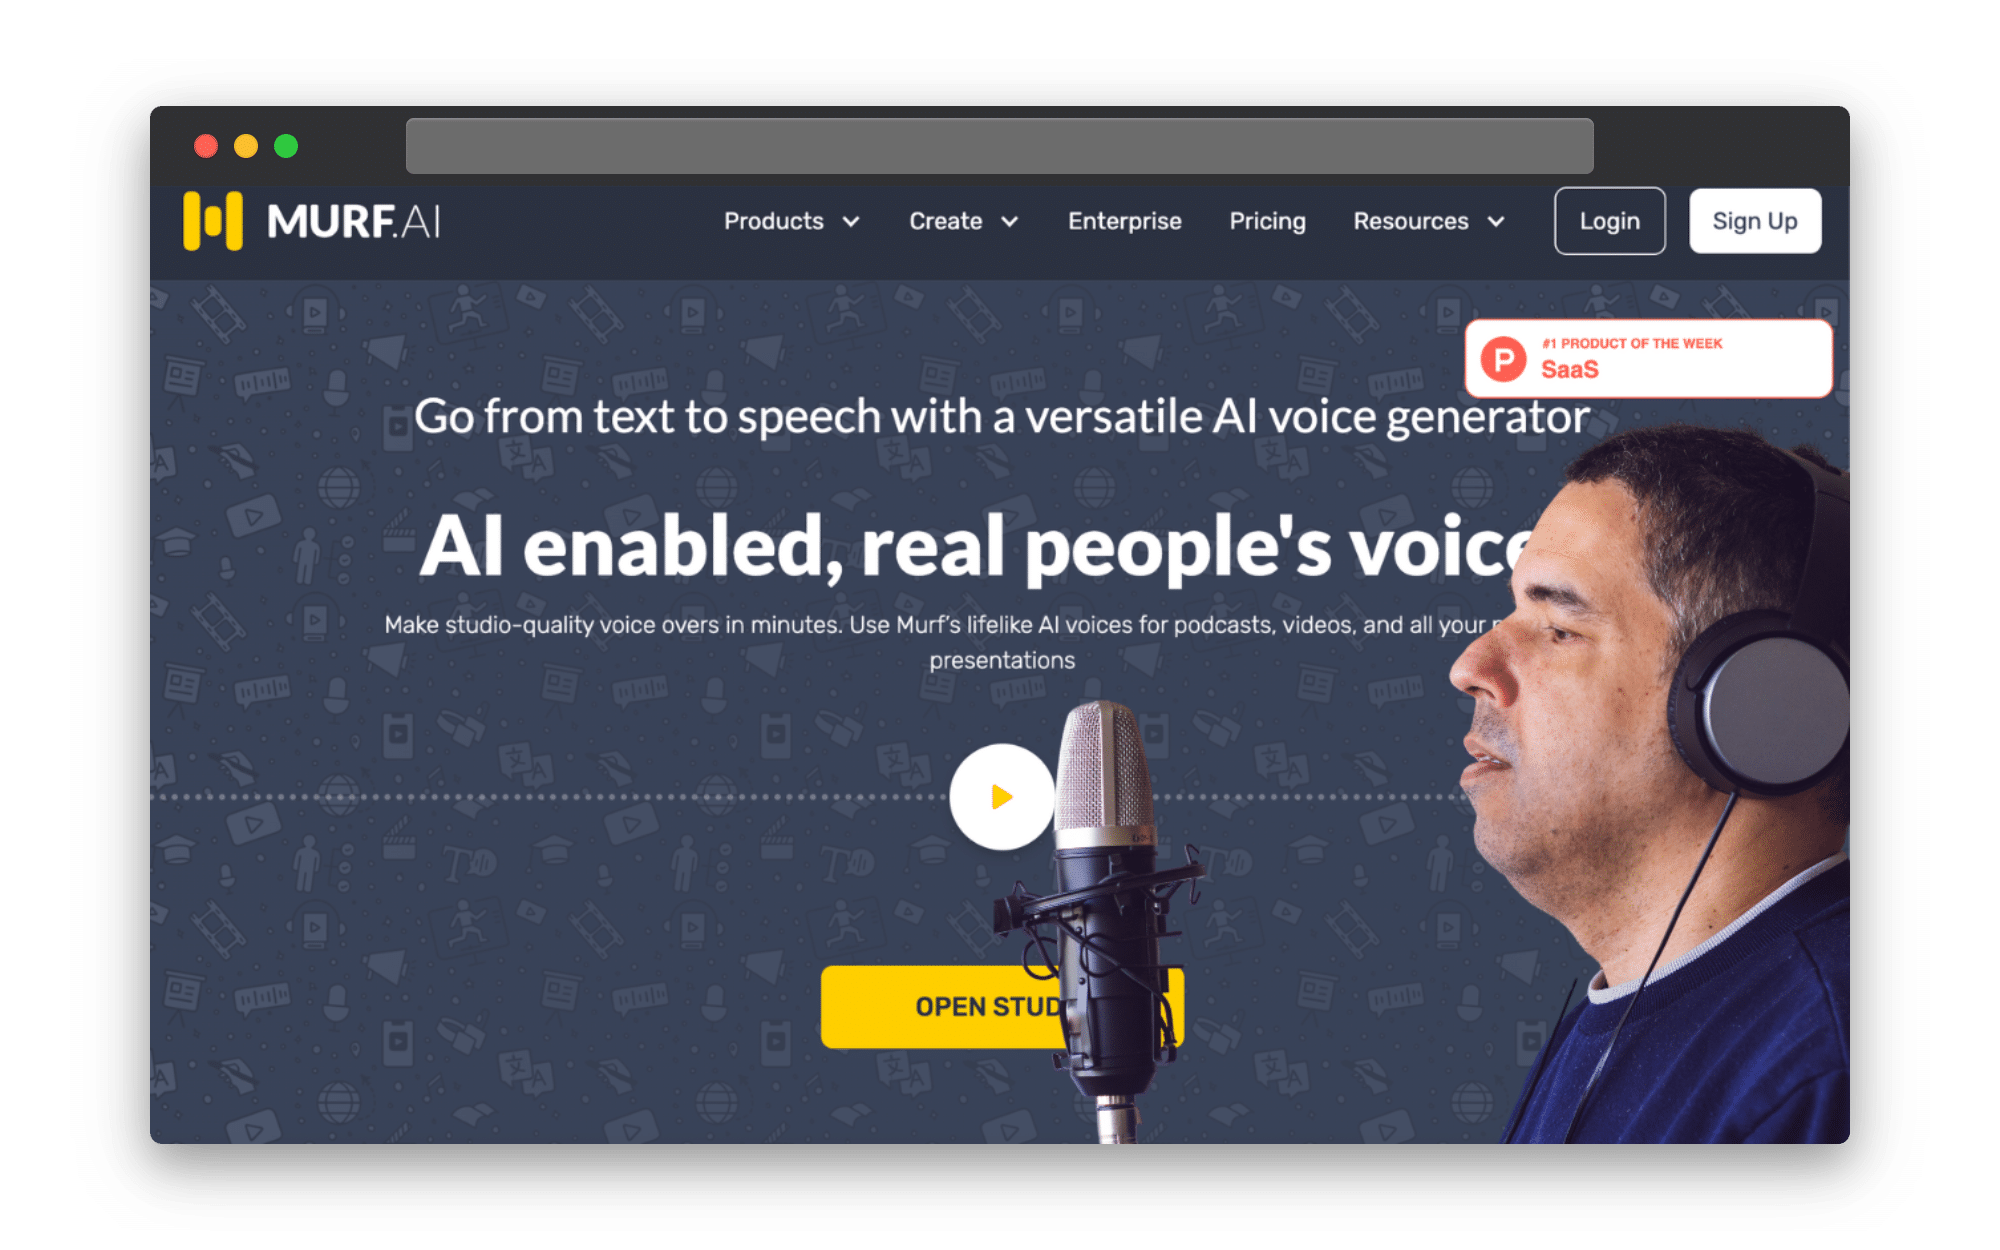 Murf.ai offers customizable pitch, tone, and speed settings ensuring it's users can create lifelike voiceovers.